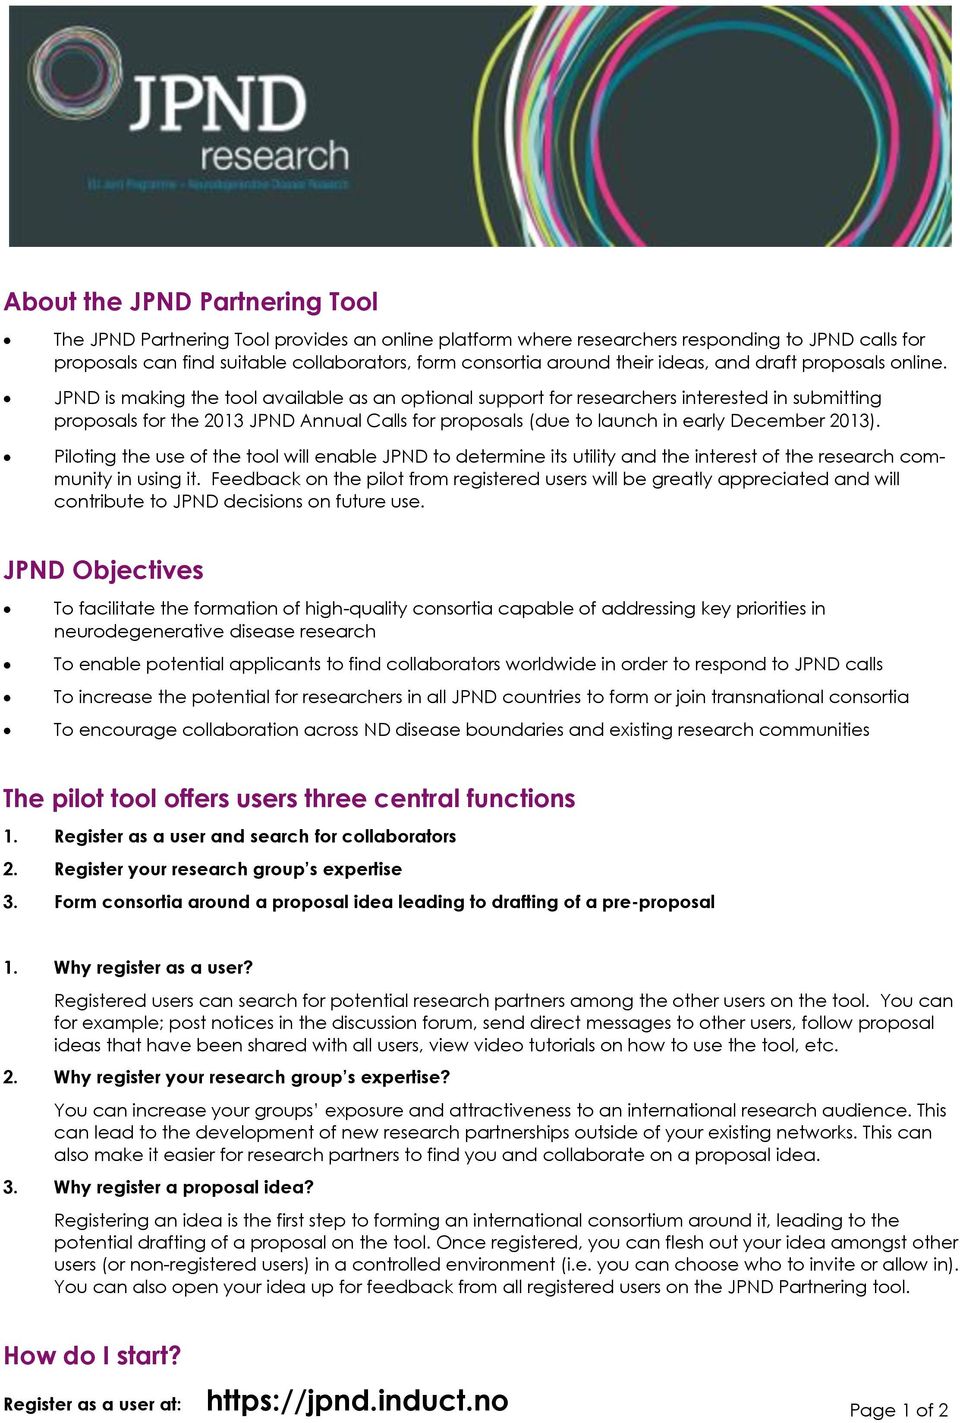 JPND is making the tool available as an optional support for researchers interested in submitting proposals for the 2013 JPND Annual Calls for proposals (due to launch in early December 2013).